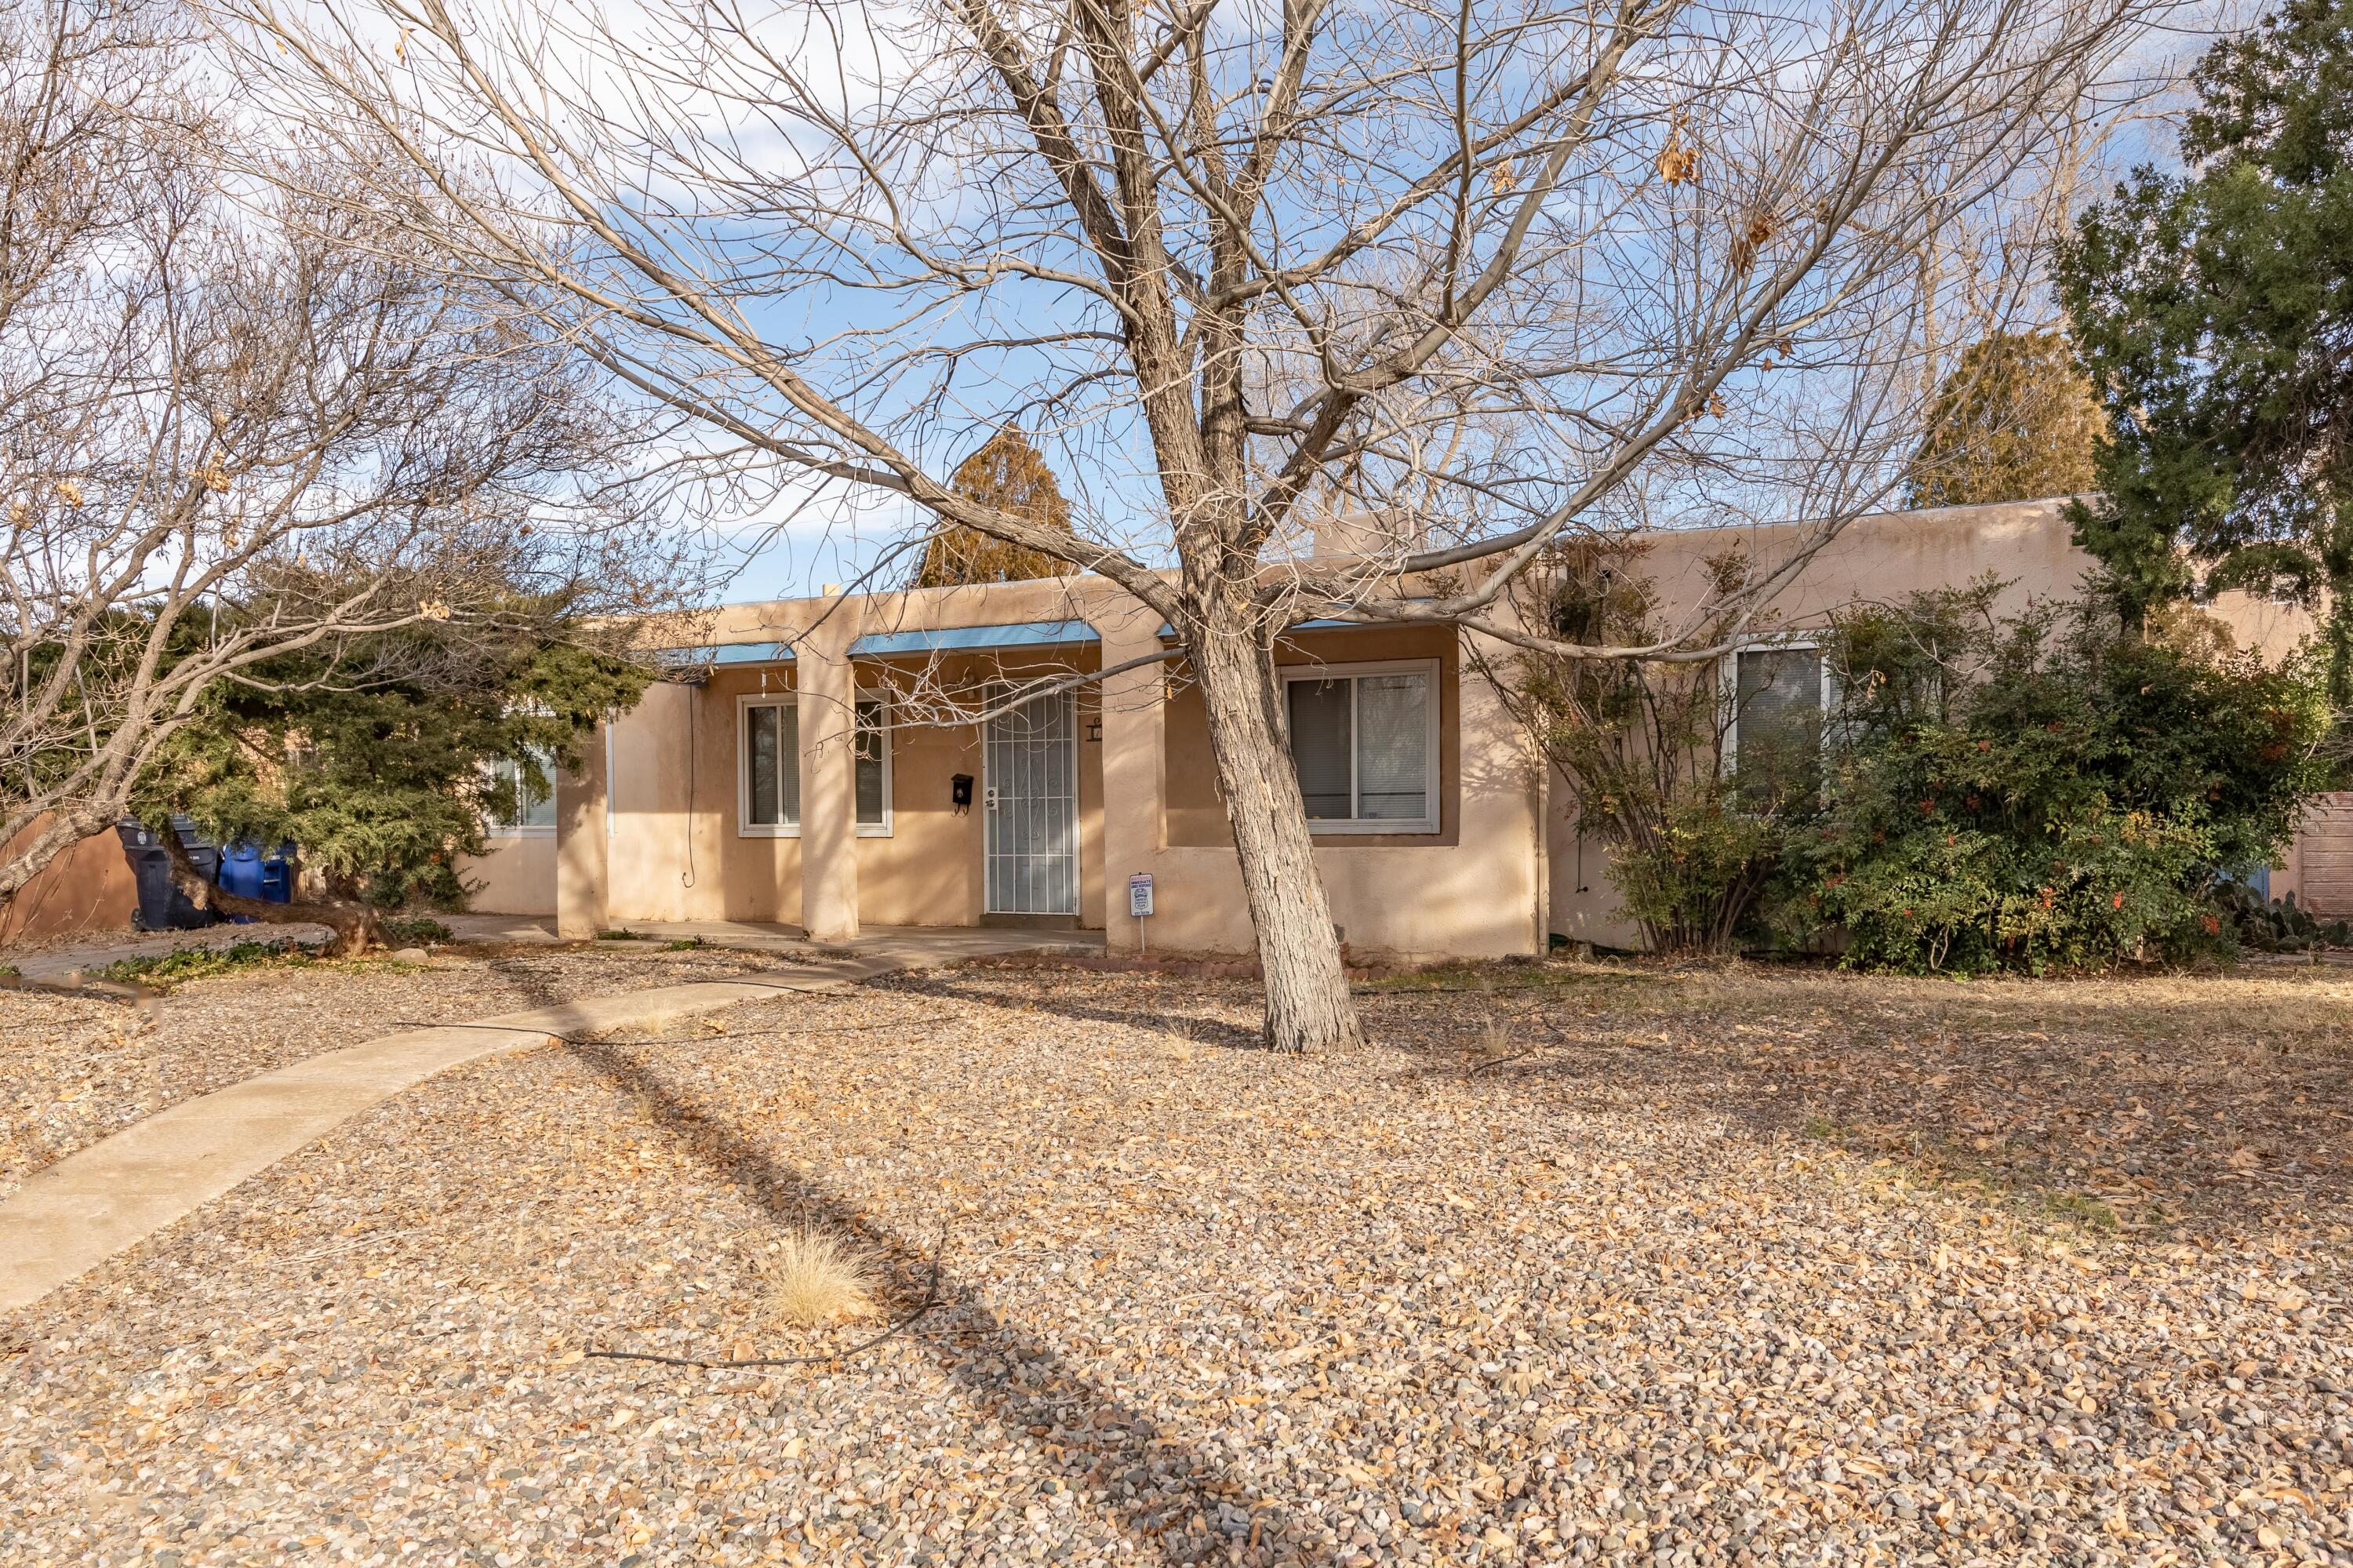 Nice 3 bedroom, 2 bath home with a large back yard. Excellent location in a long established neighborhood close to schools, shopping, restaurants, hospitals, University of New Mexico law school & medical school.